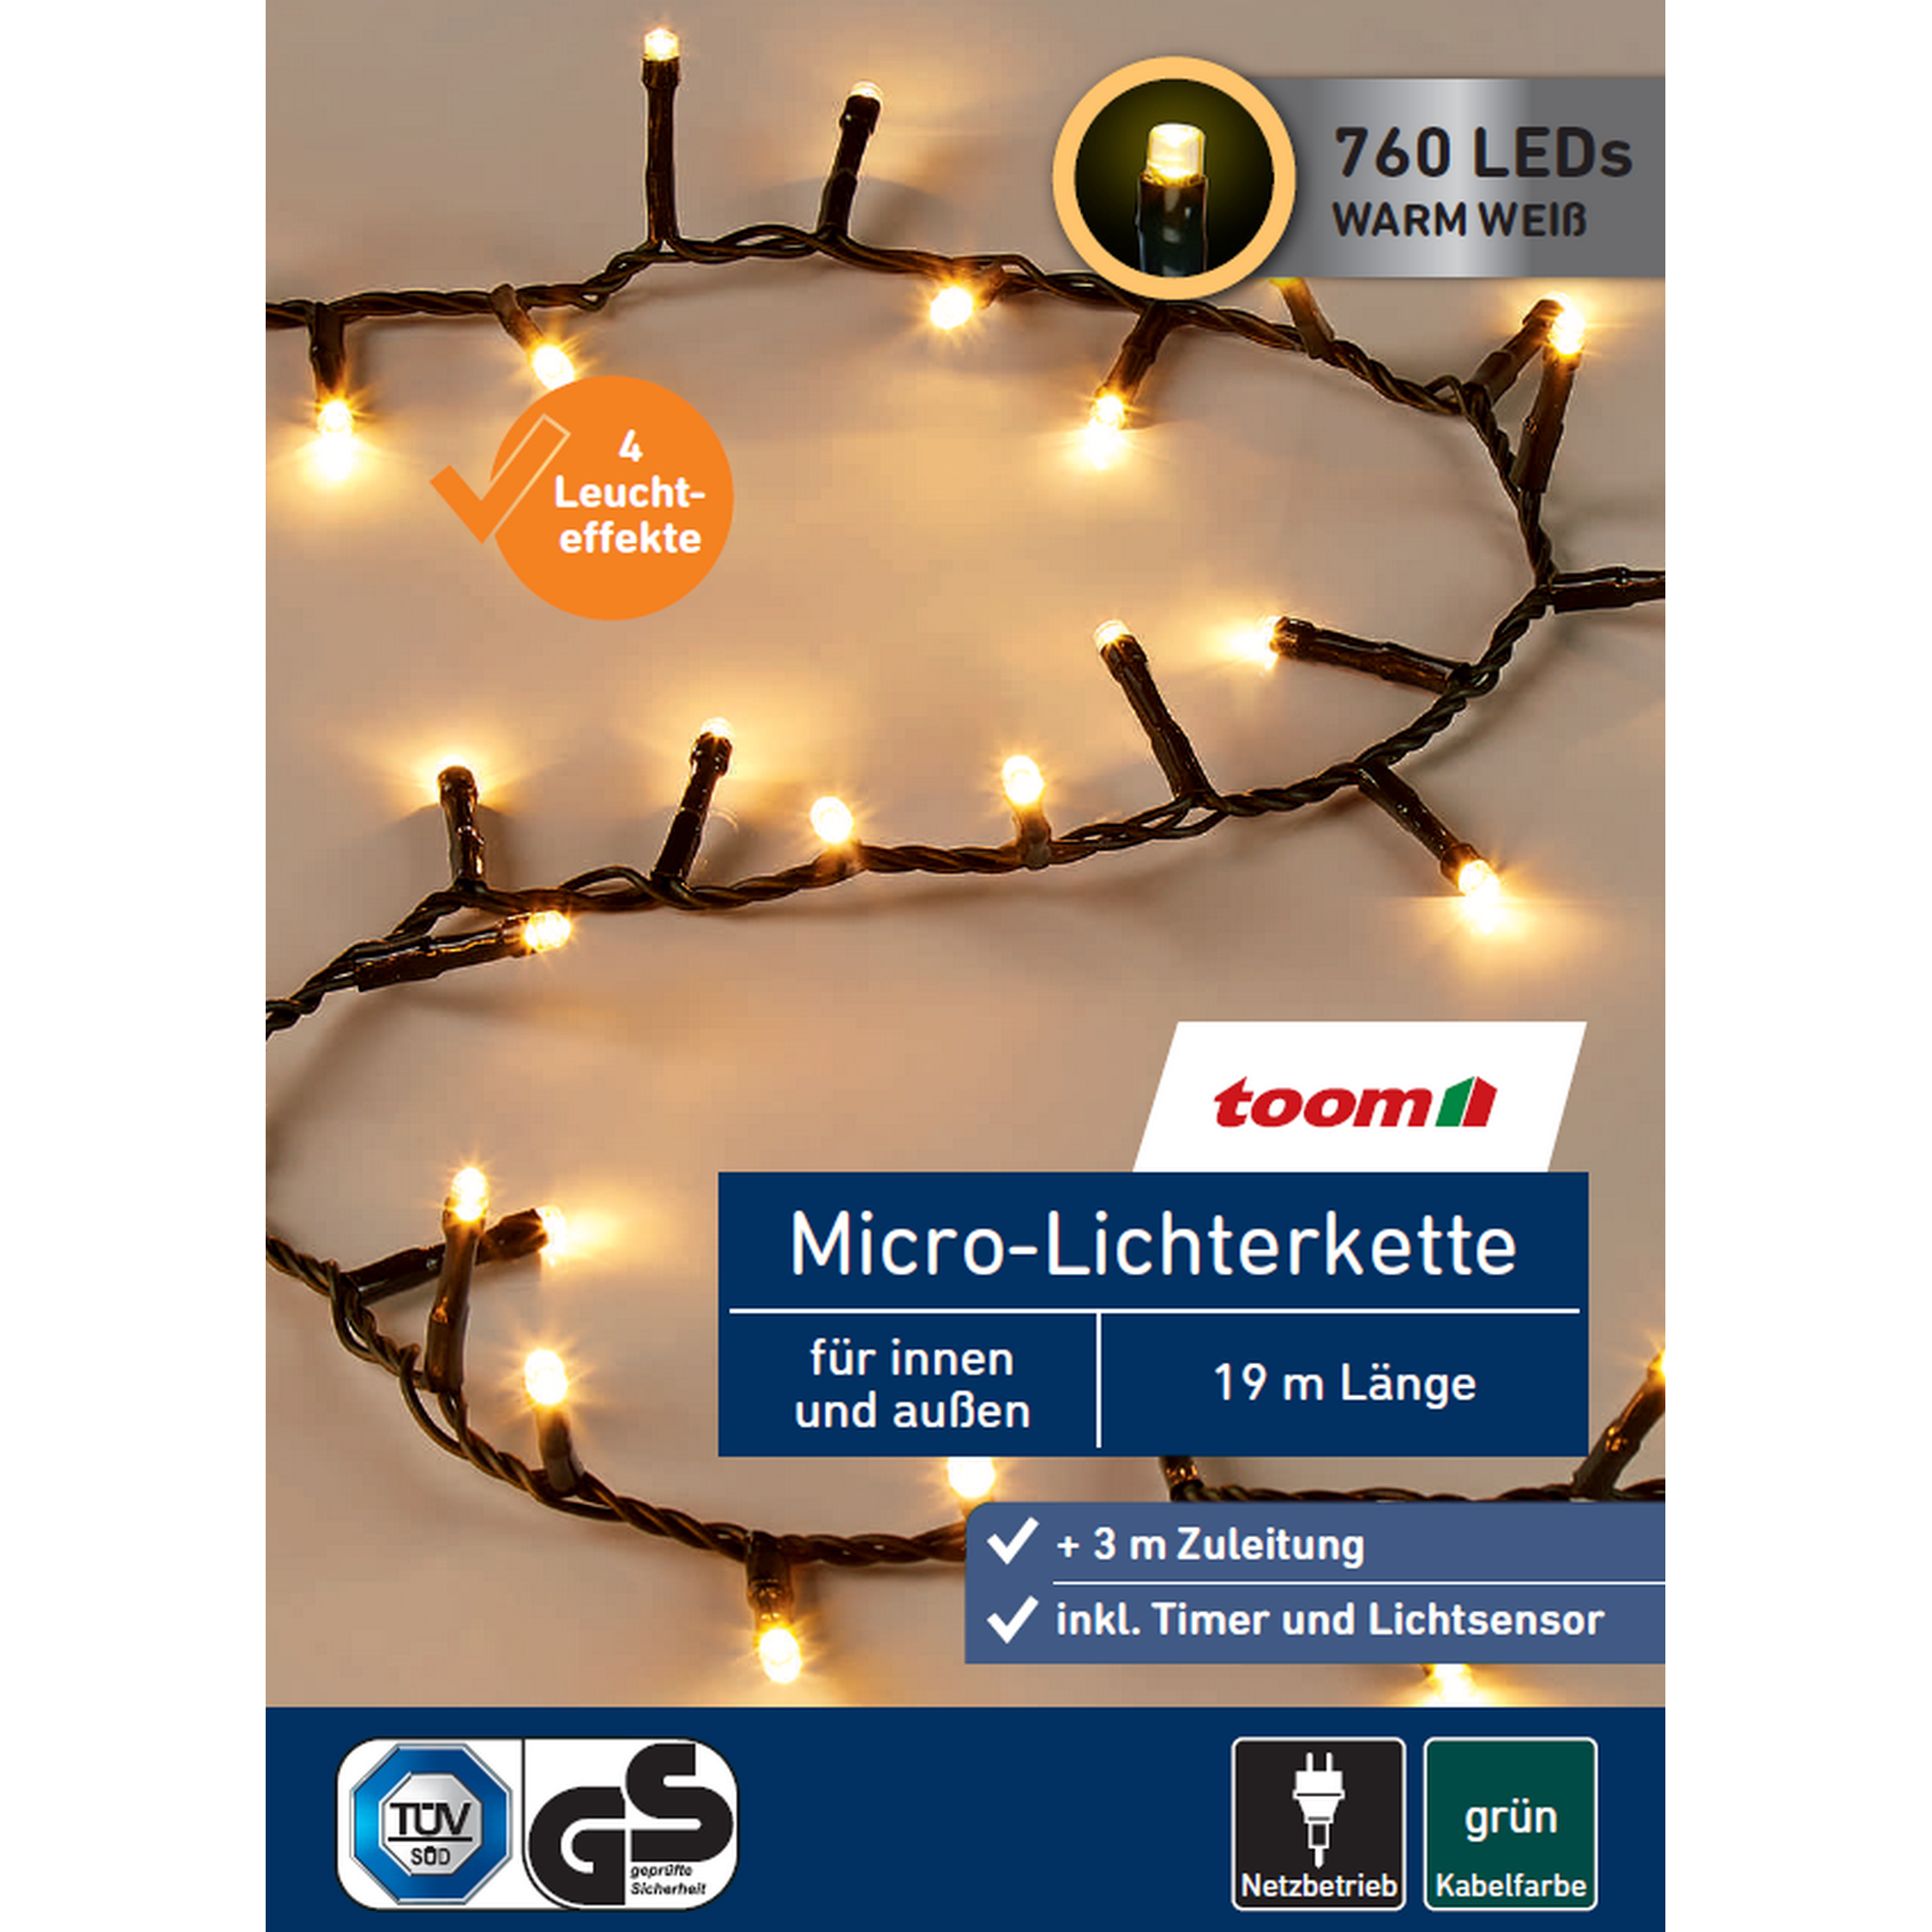 LED-Micro-Lichterkette 760 LEDs warmweiß 1900 cm + product picture